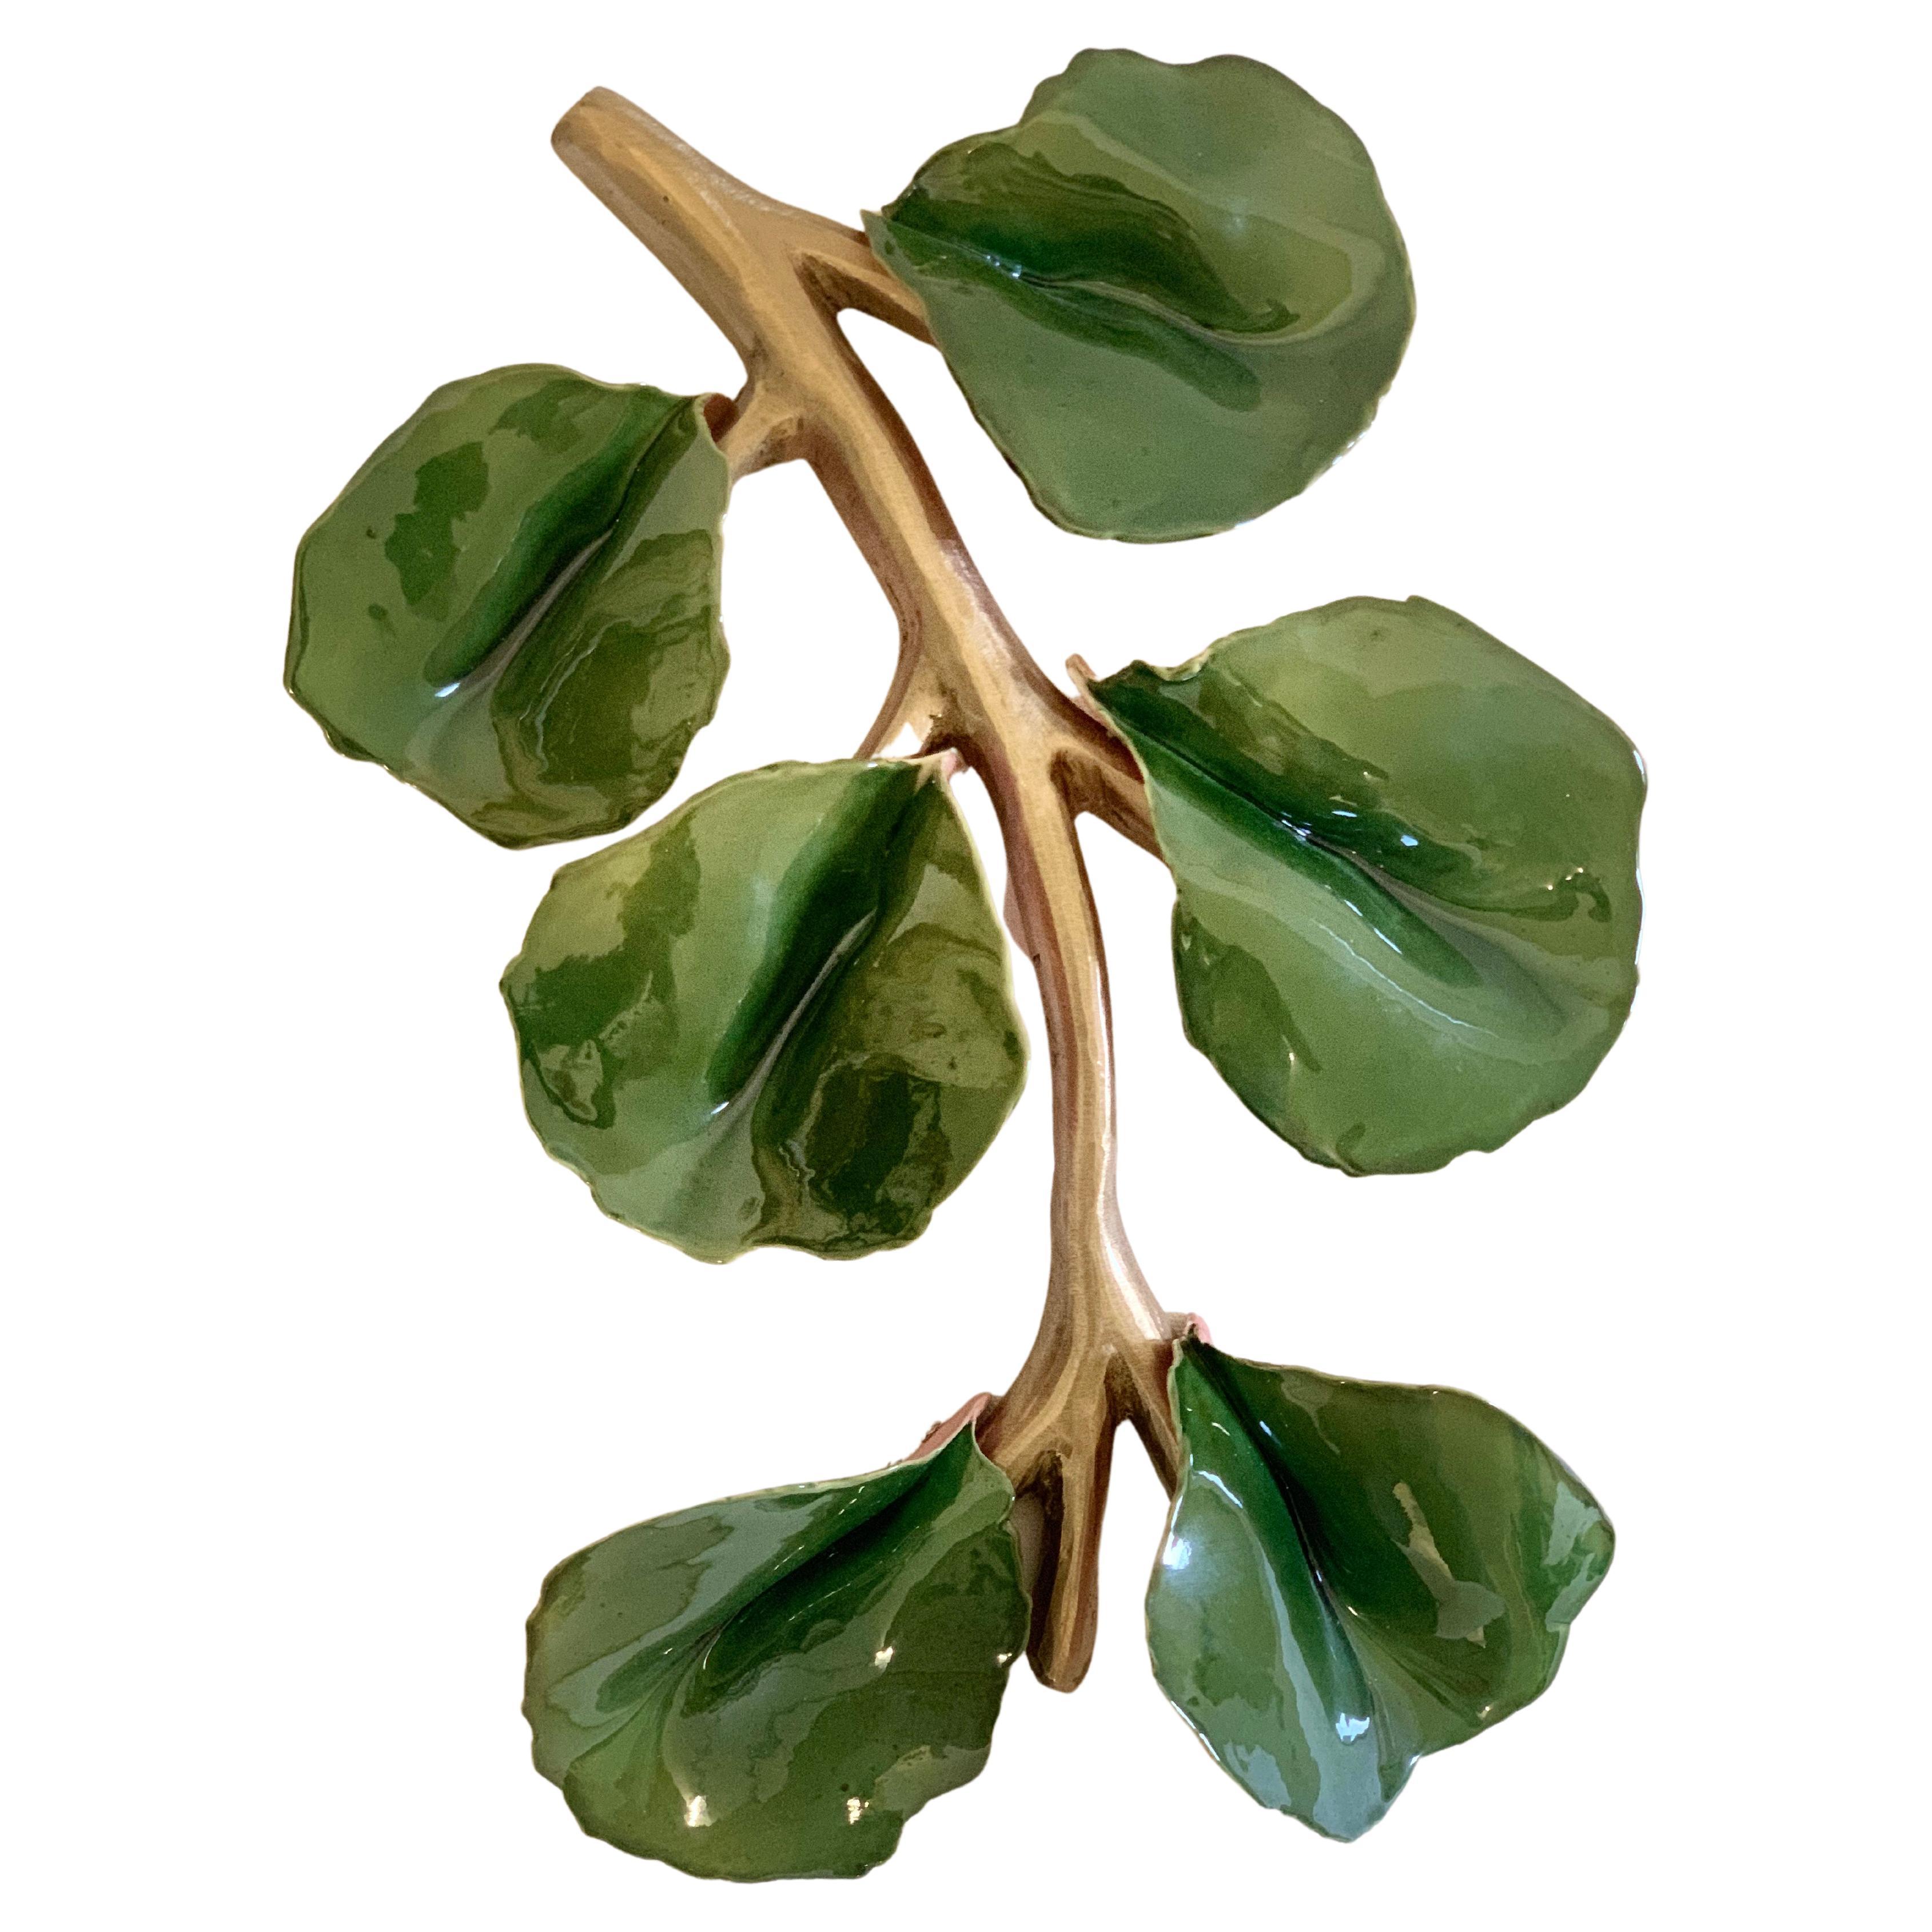 This is a custom sculpture and decorative object cast in solid bronze with green ceramic leaves. The ceramic leaves have been beautifully fired to achieve a high gloss green. Bronze has been polished and sealed to a high polish.